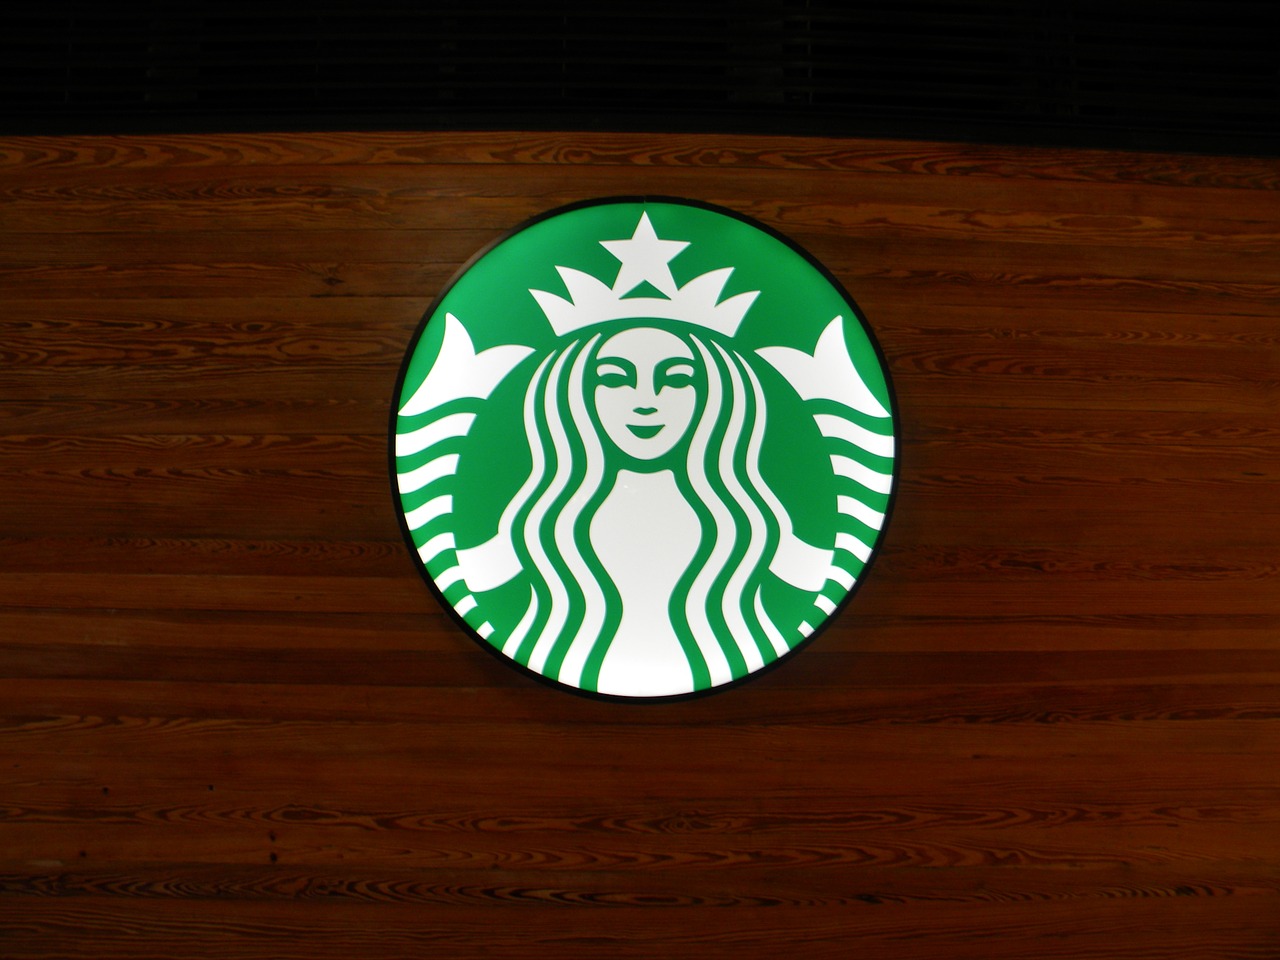 Starbucks is finally coming to Italy